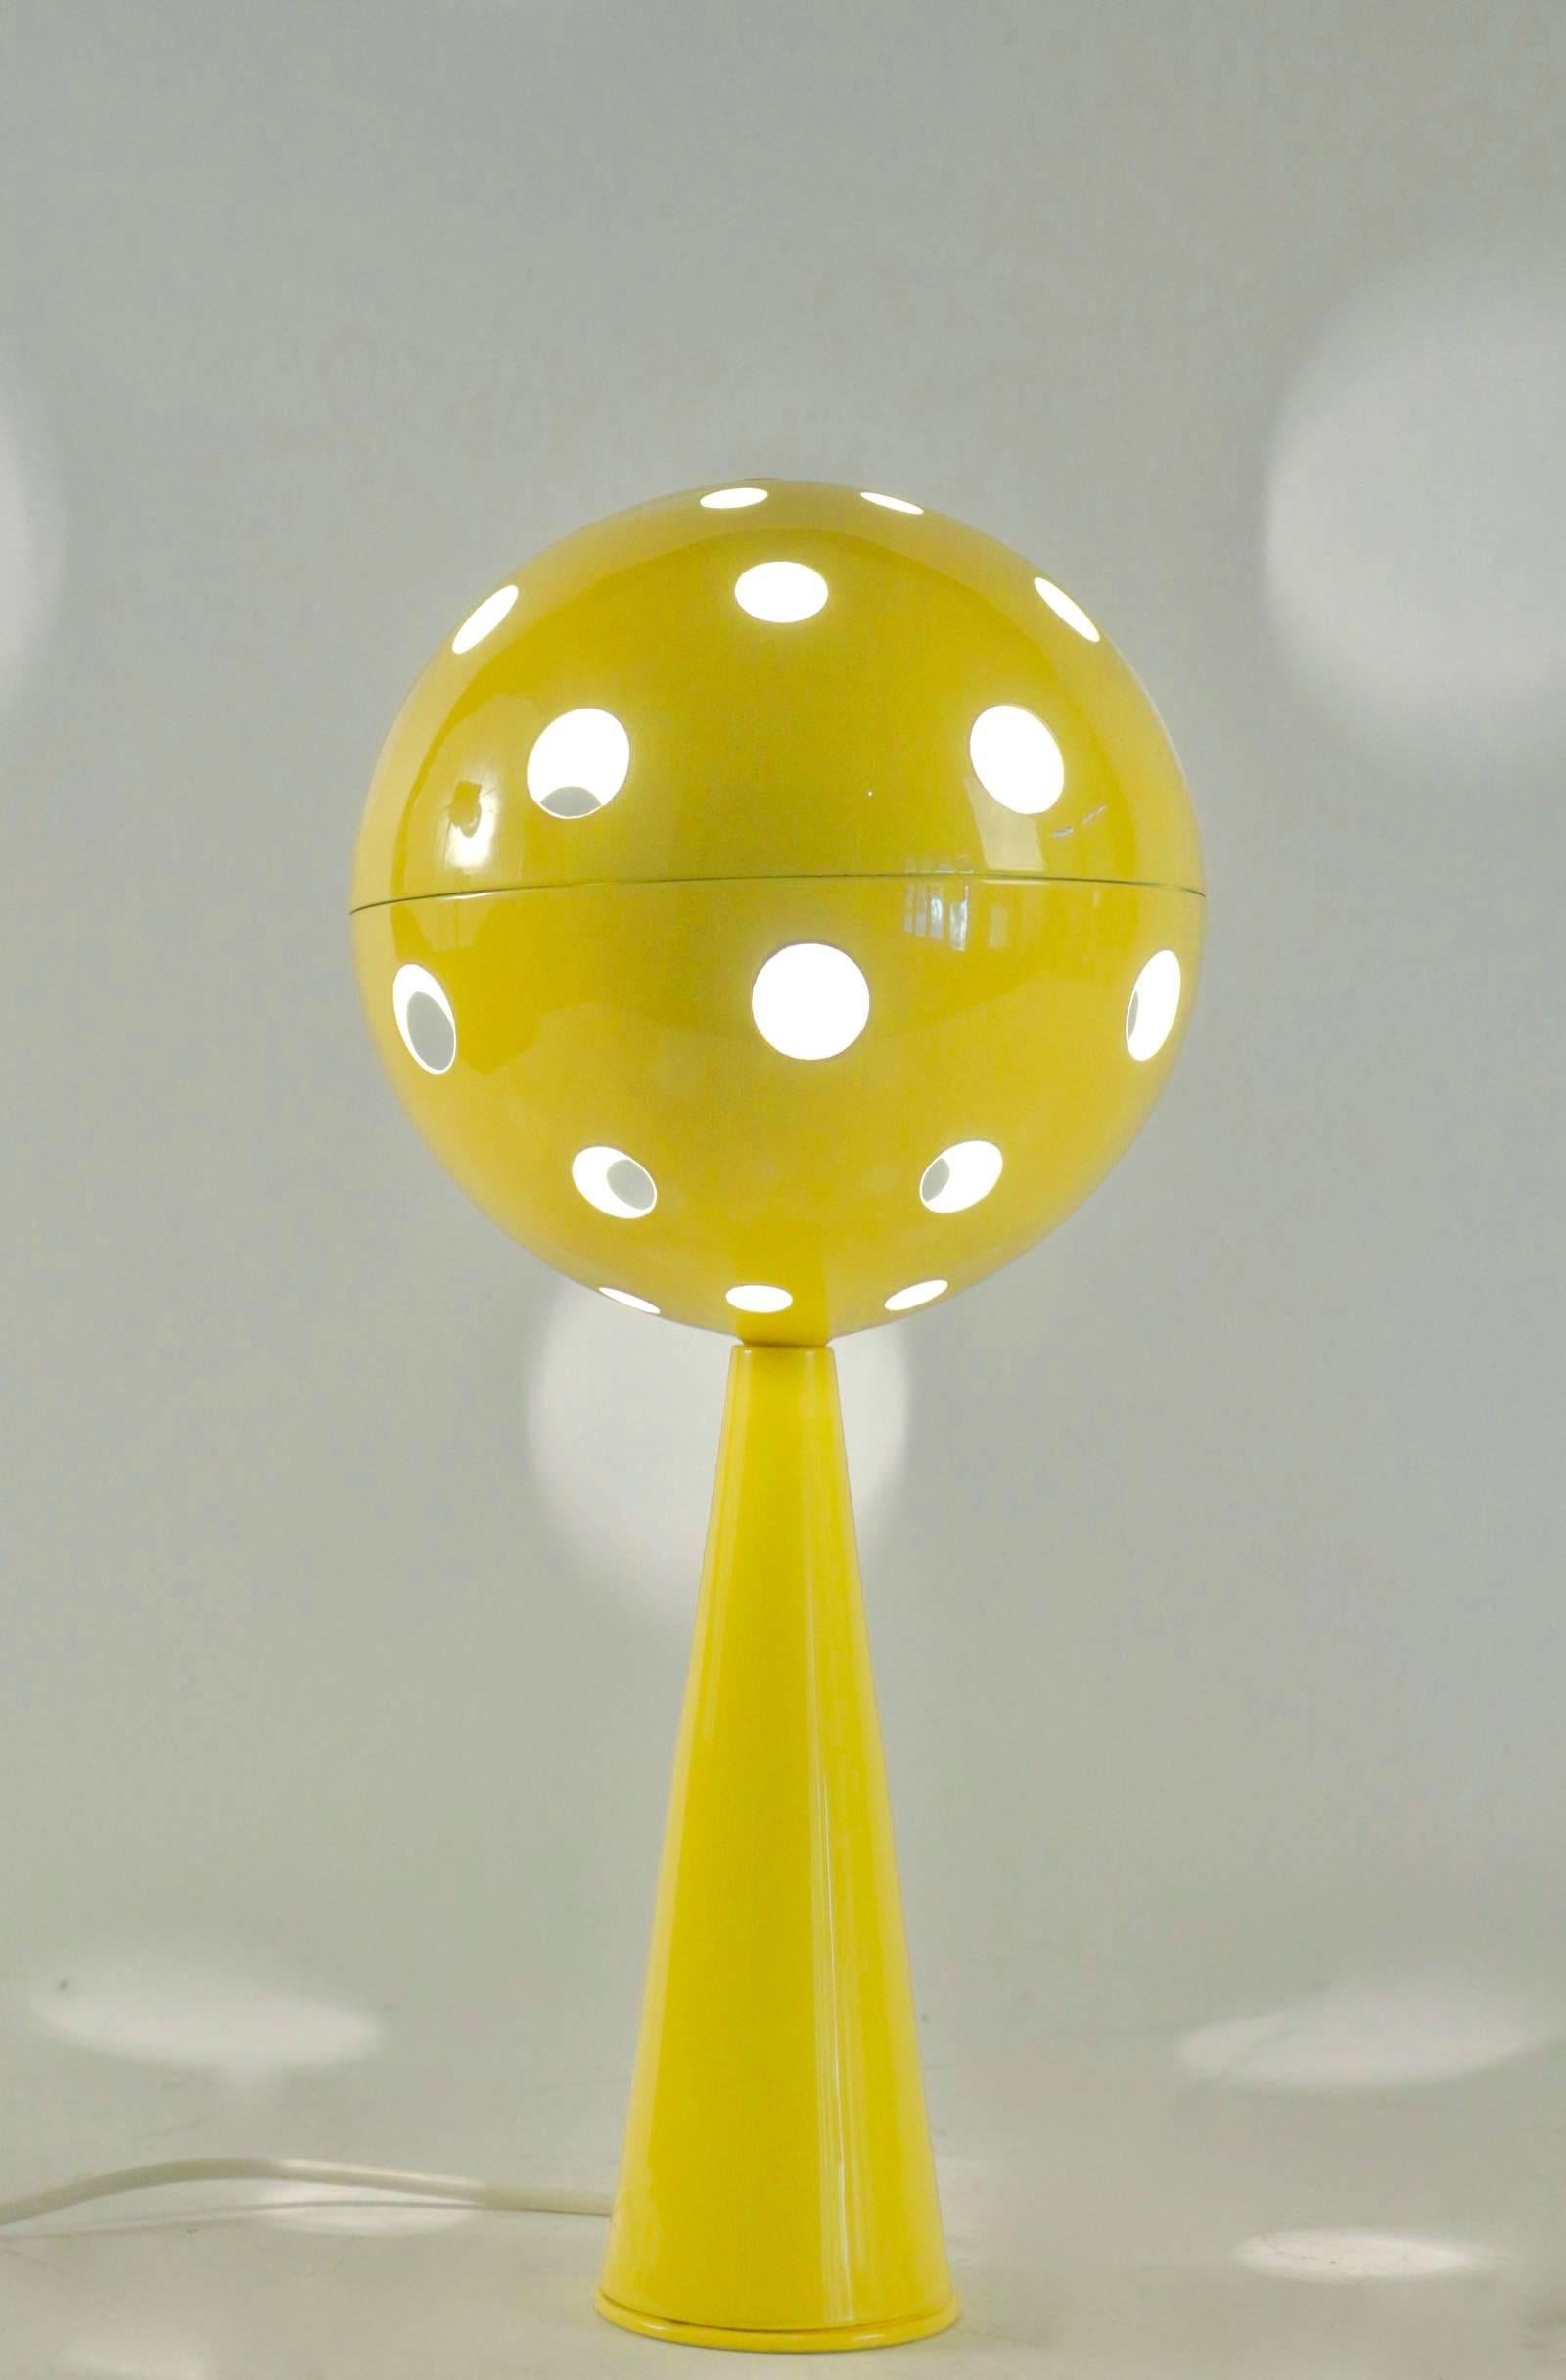 Rare table lamp model Planétaire / Planetary by Sabine Charoy.

Yellow lacquered steel. The conical foot lamp supports a large perforated ball which contains the bulb. The light shines through the holes of different sizes.

The lamps was